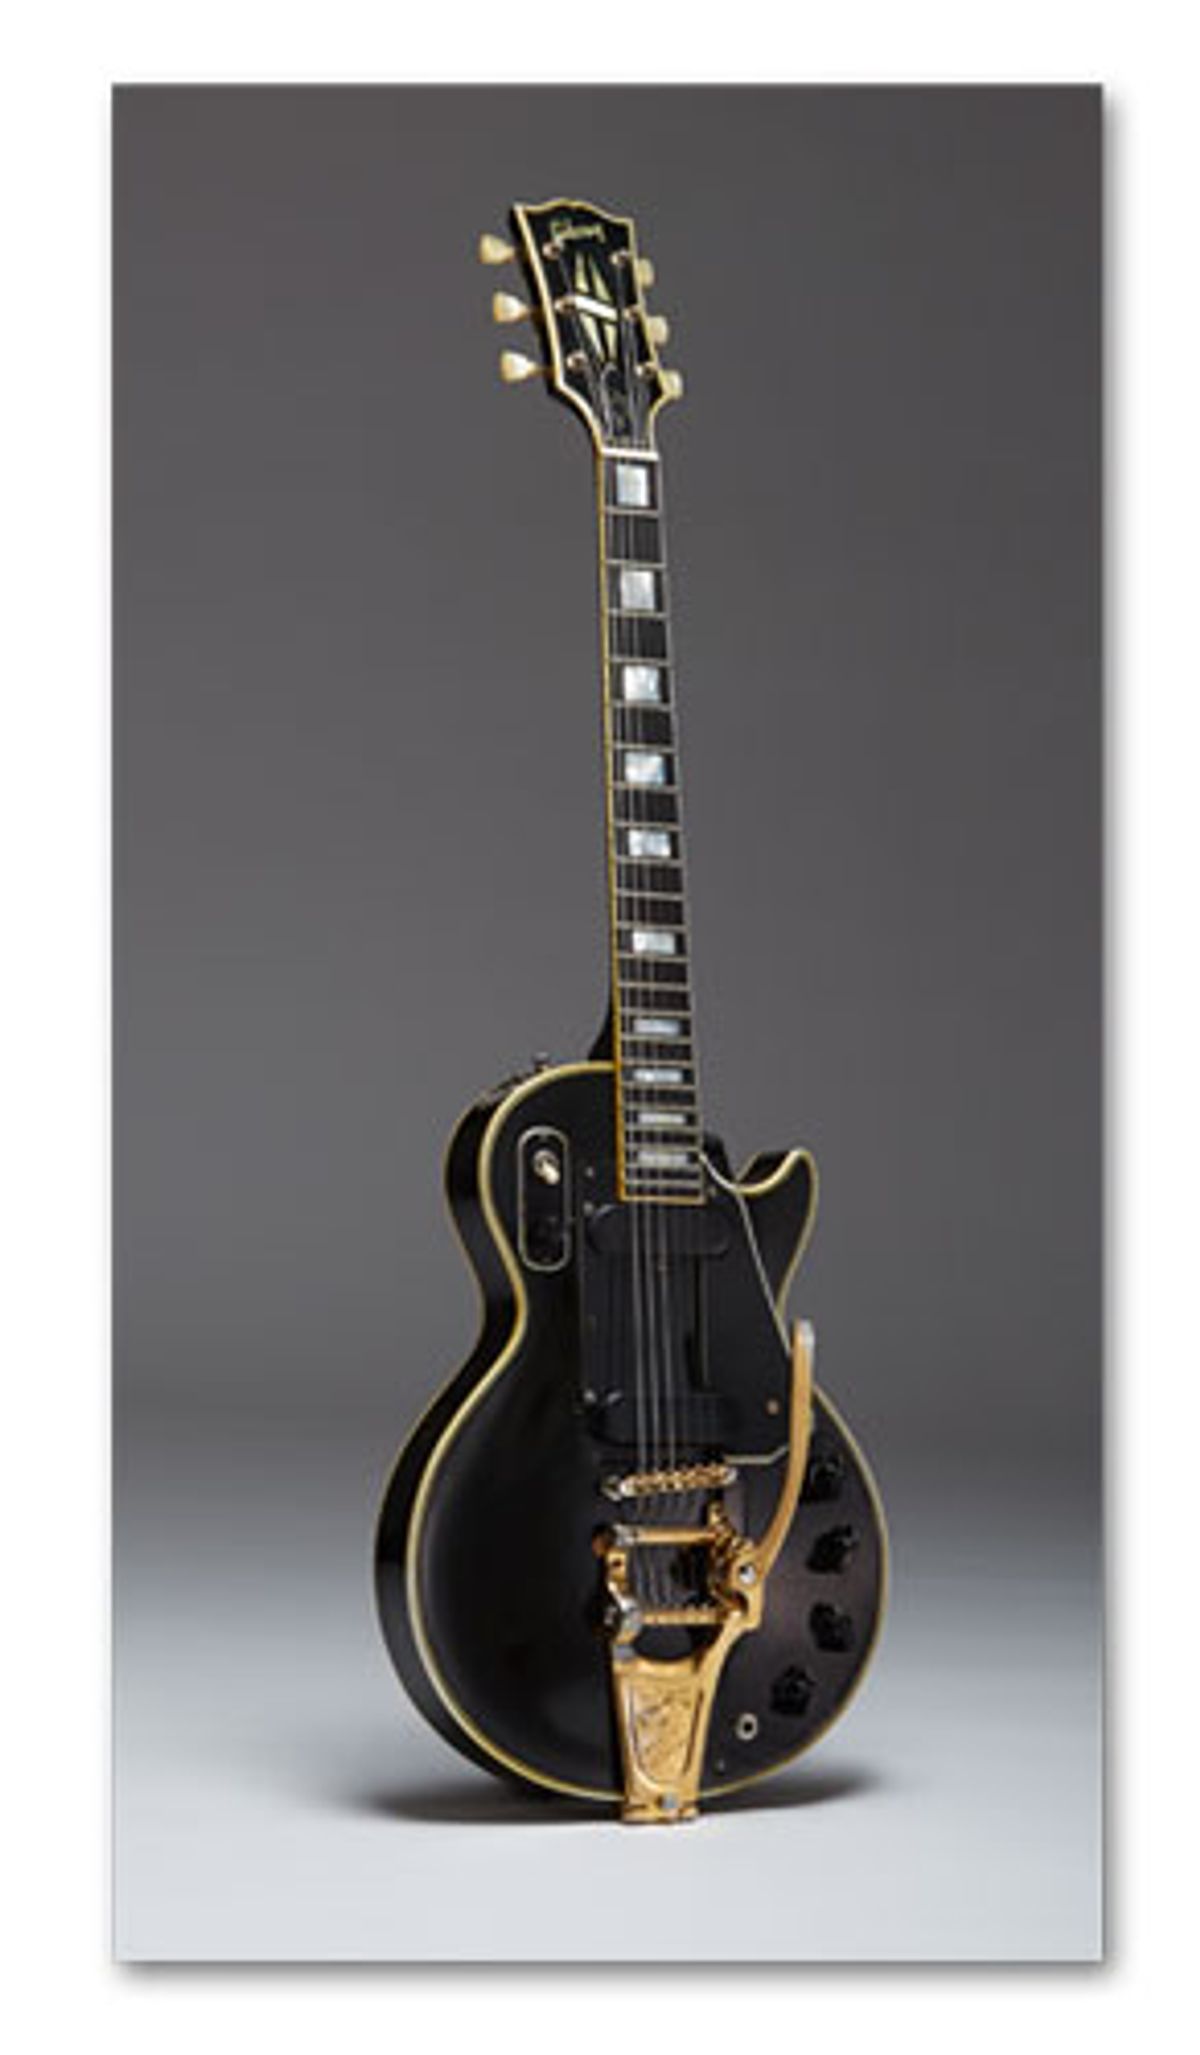 Auction to Feature Les Paul's Original "Black Beauty", Chet Atkins' "Dark Eyes" Gretsch, and More